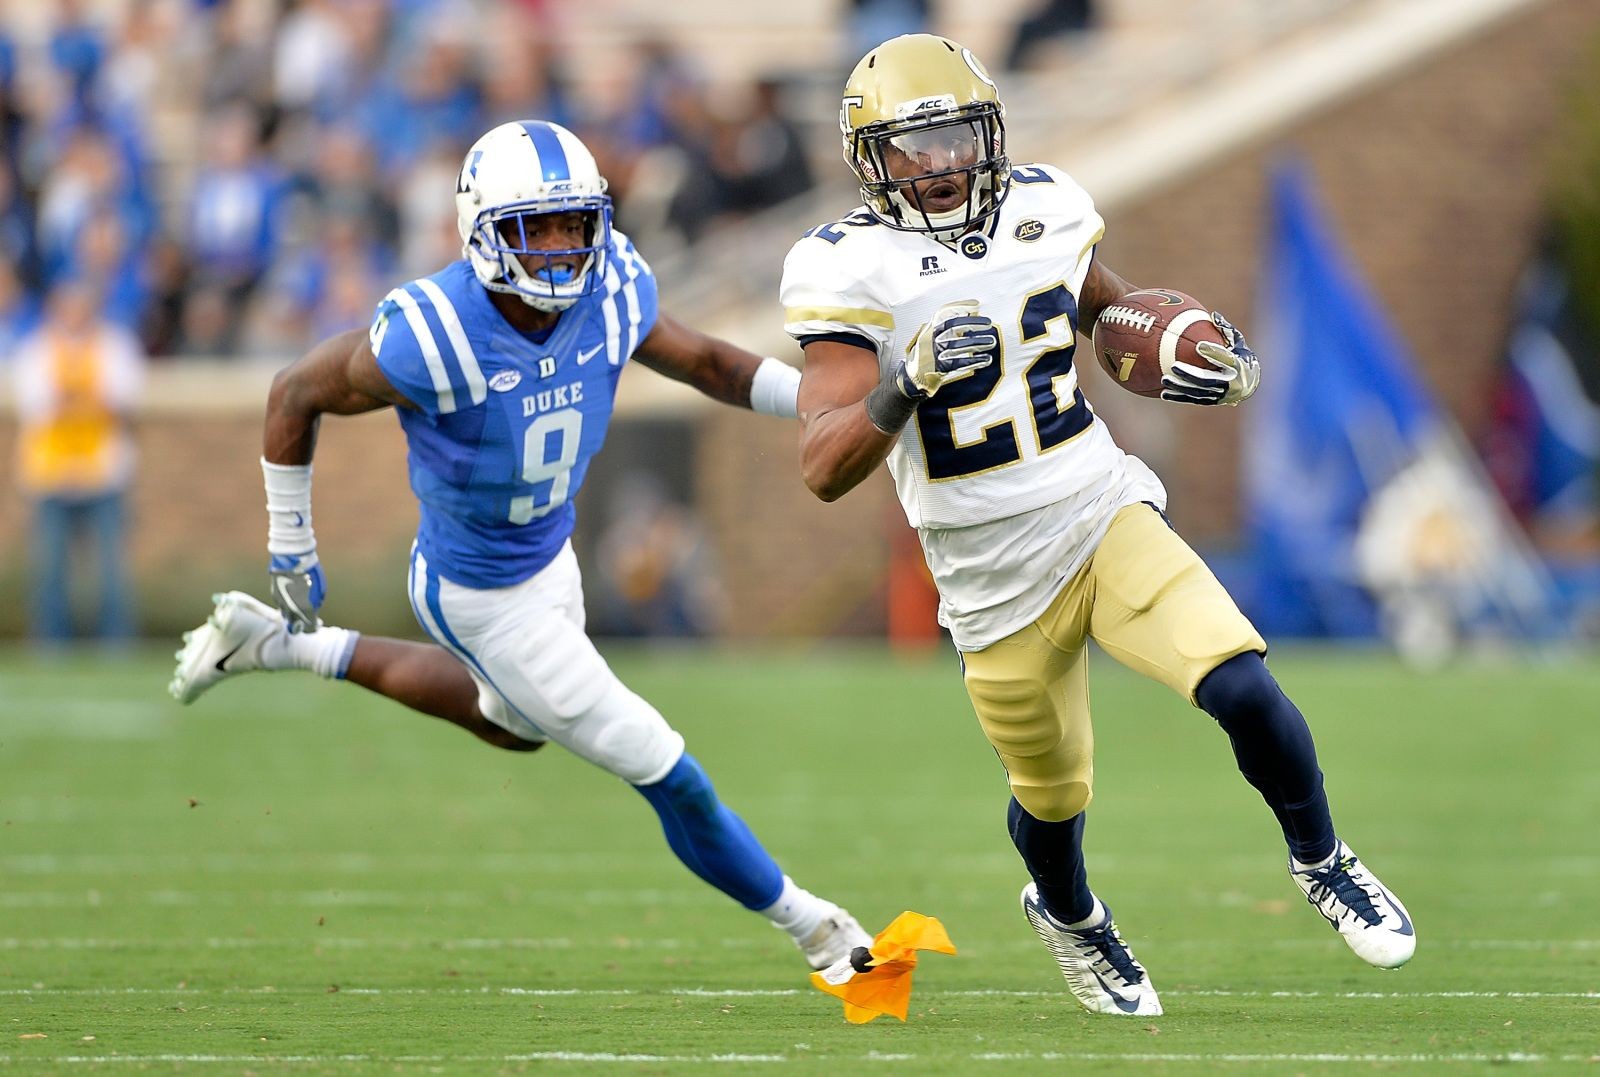 ACC announces Tech and Duke kickoff time for